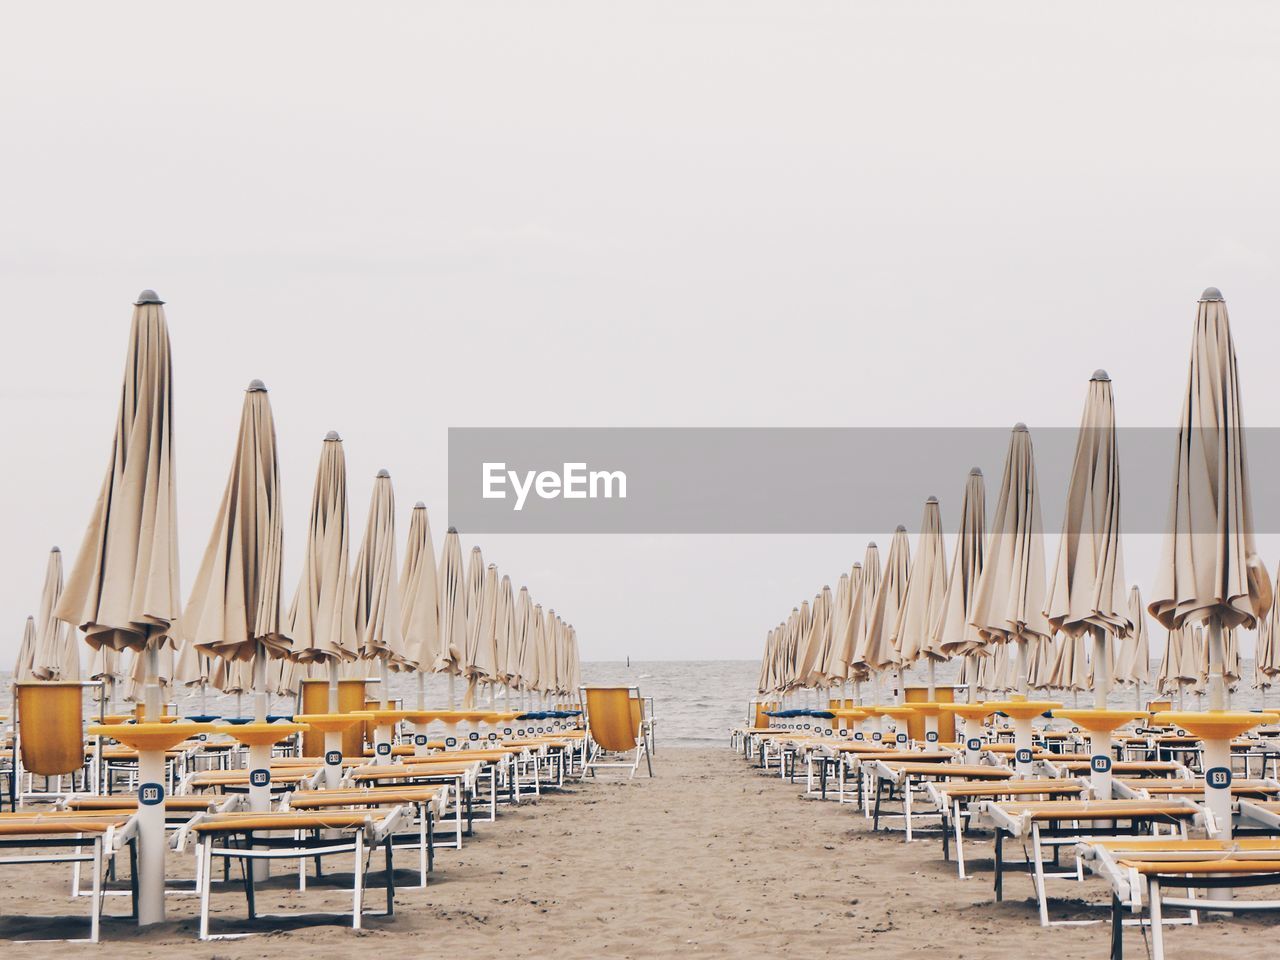 View of empty chairs on beach